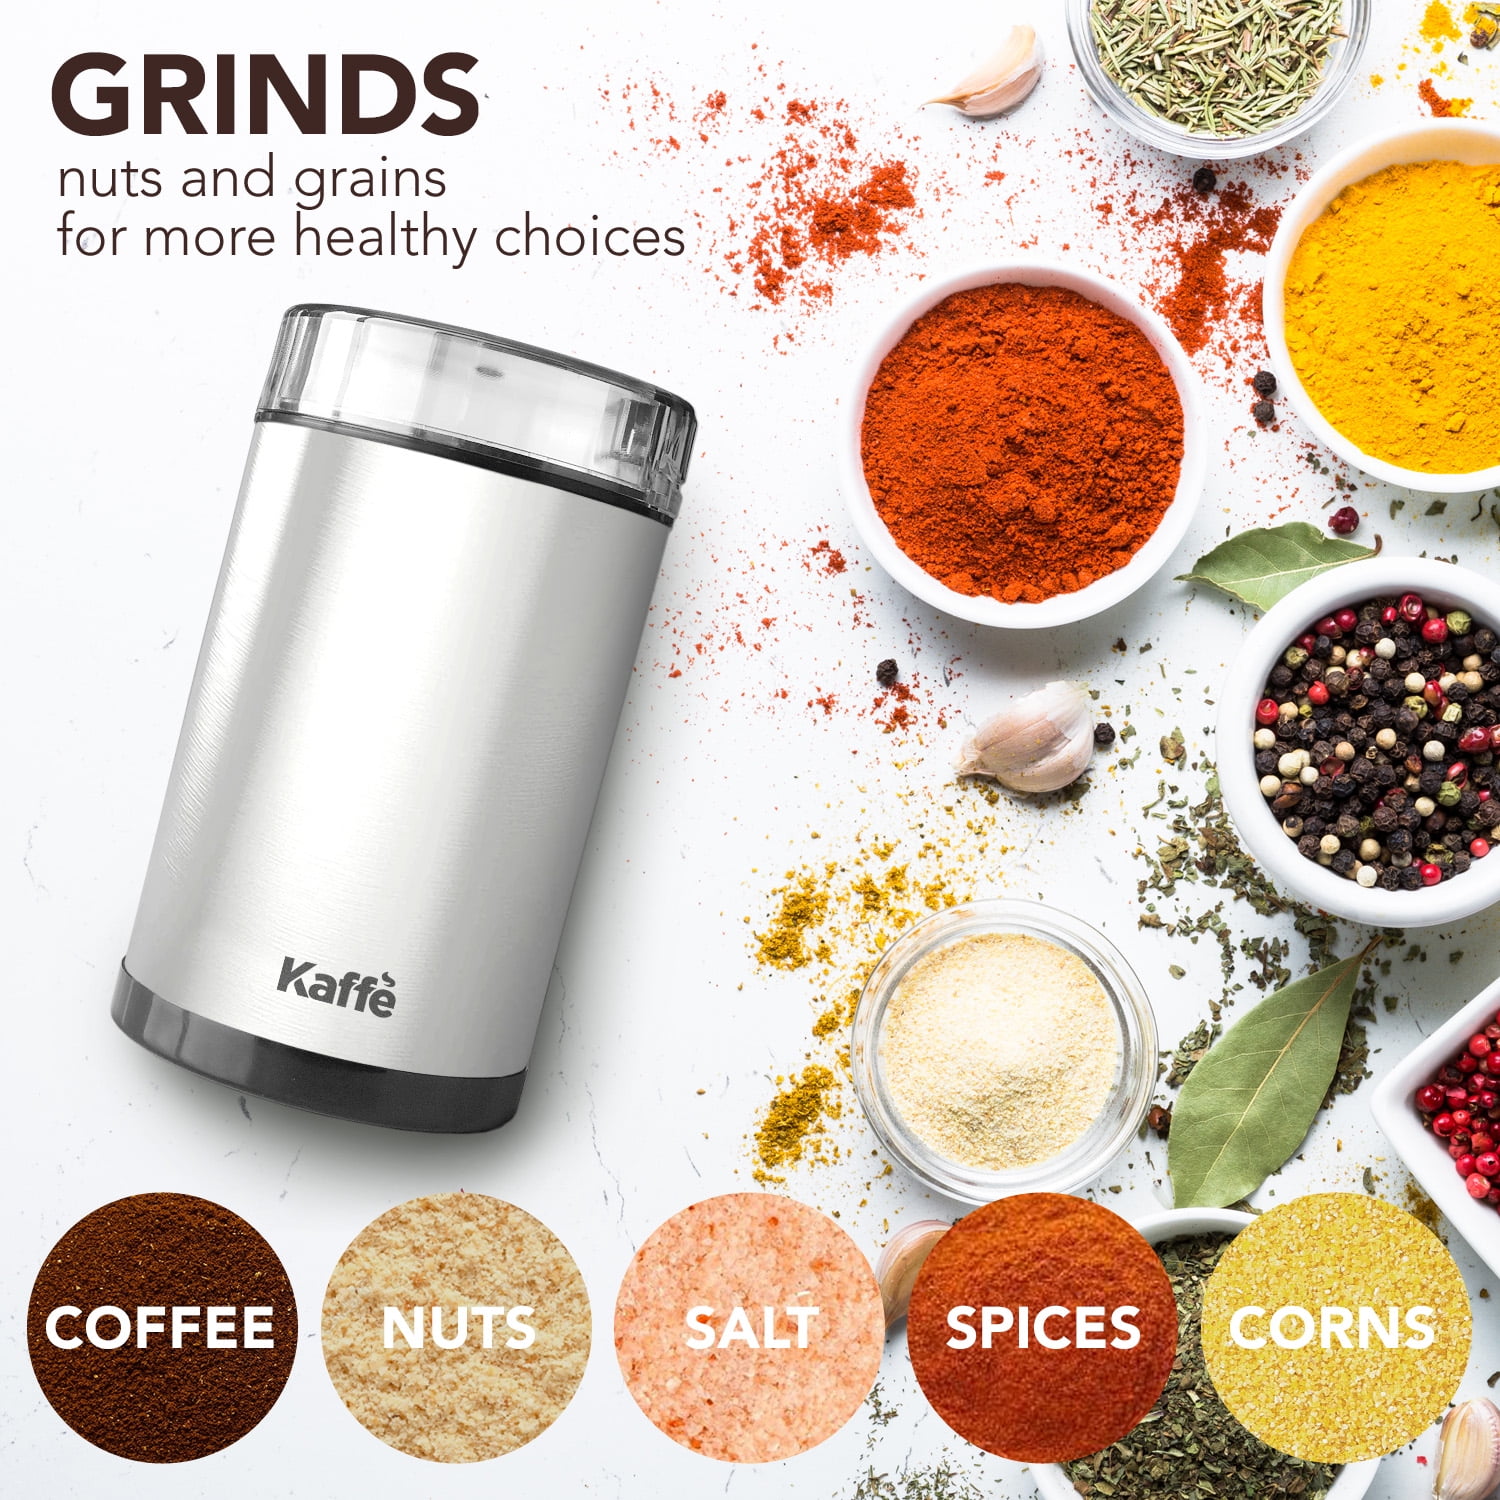 Kalorik® Coffee and Spice Grinder, Black and Stainless Steel